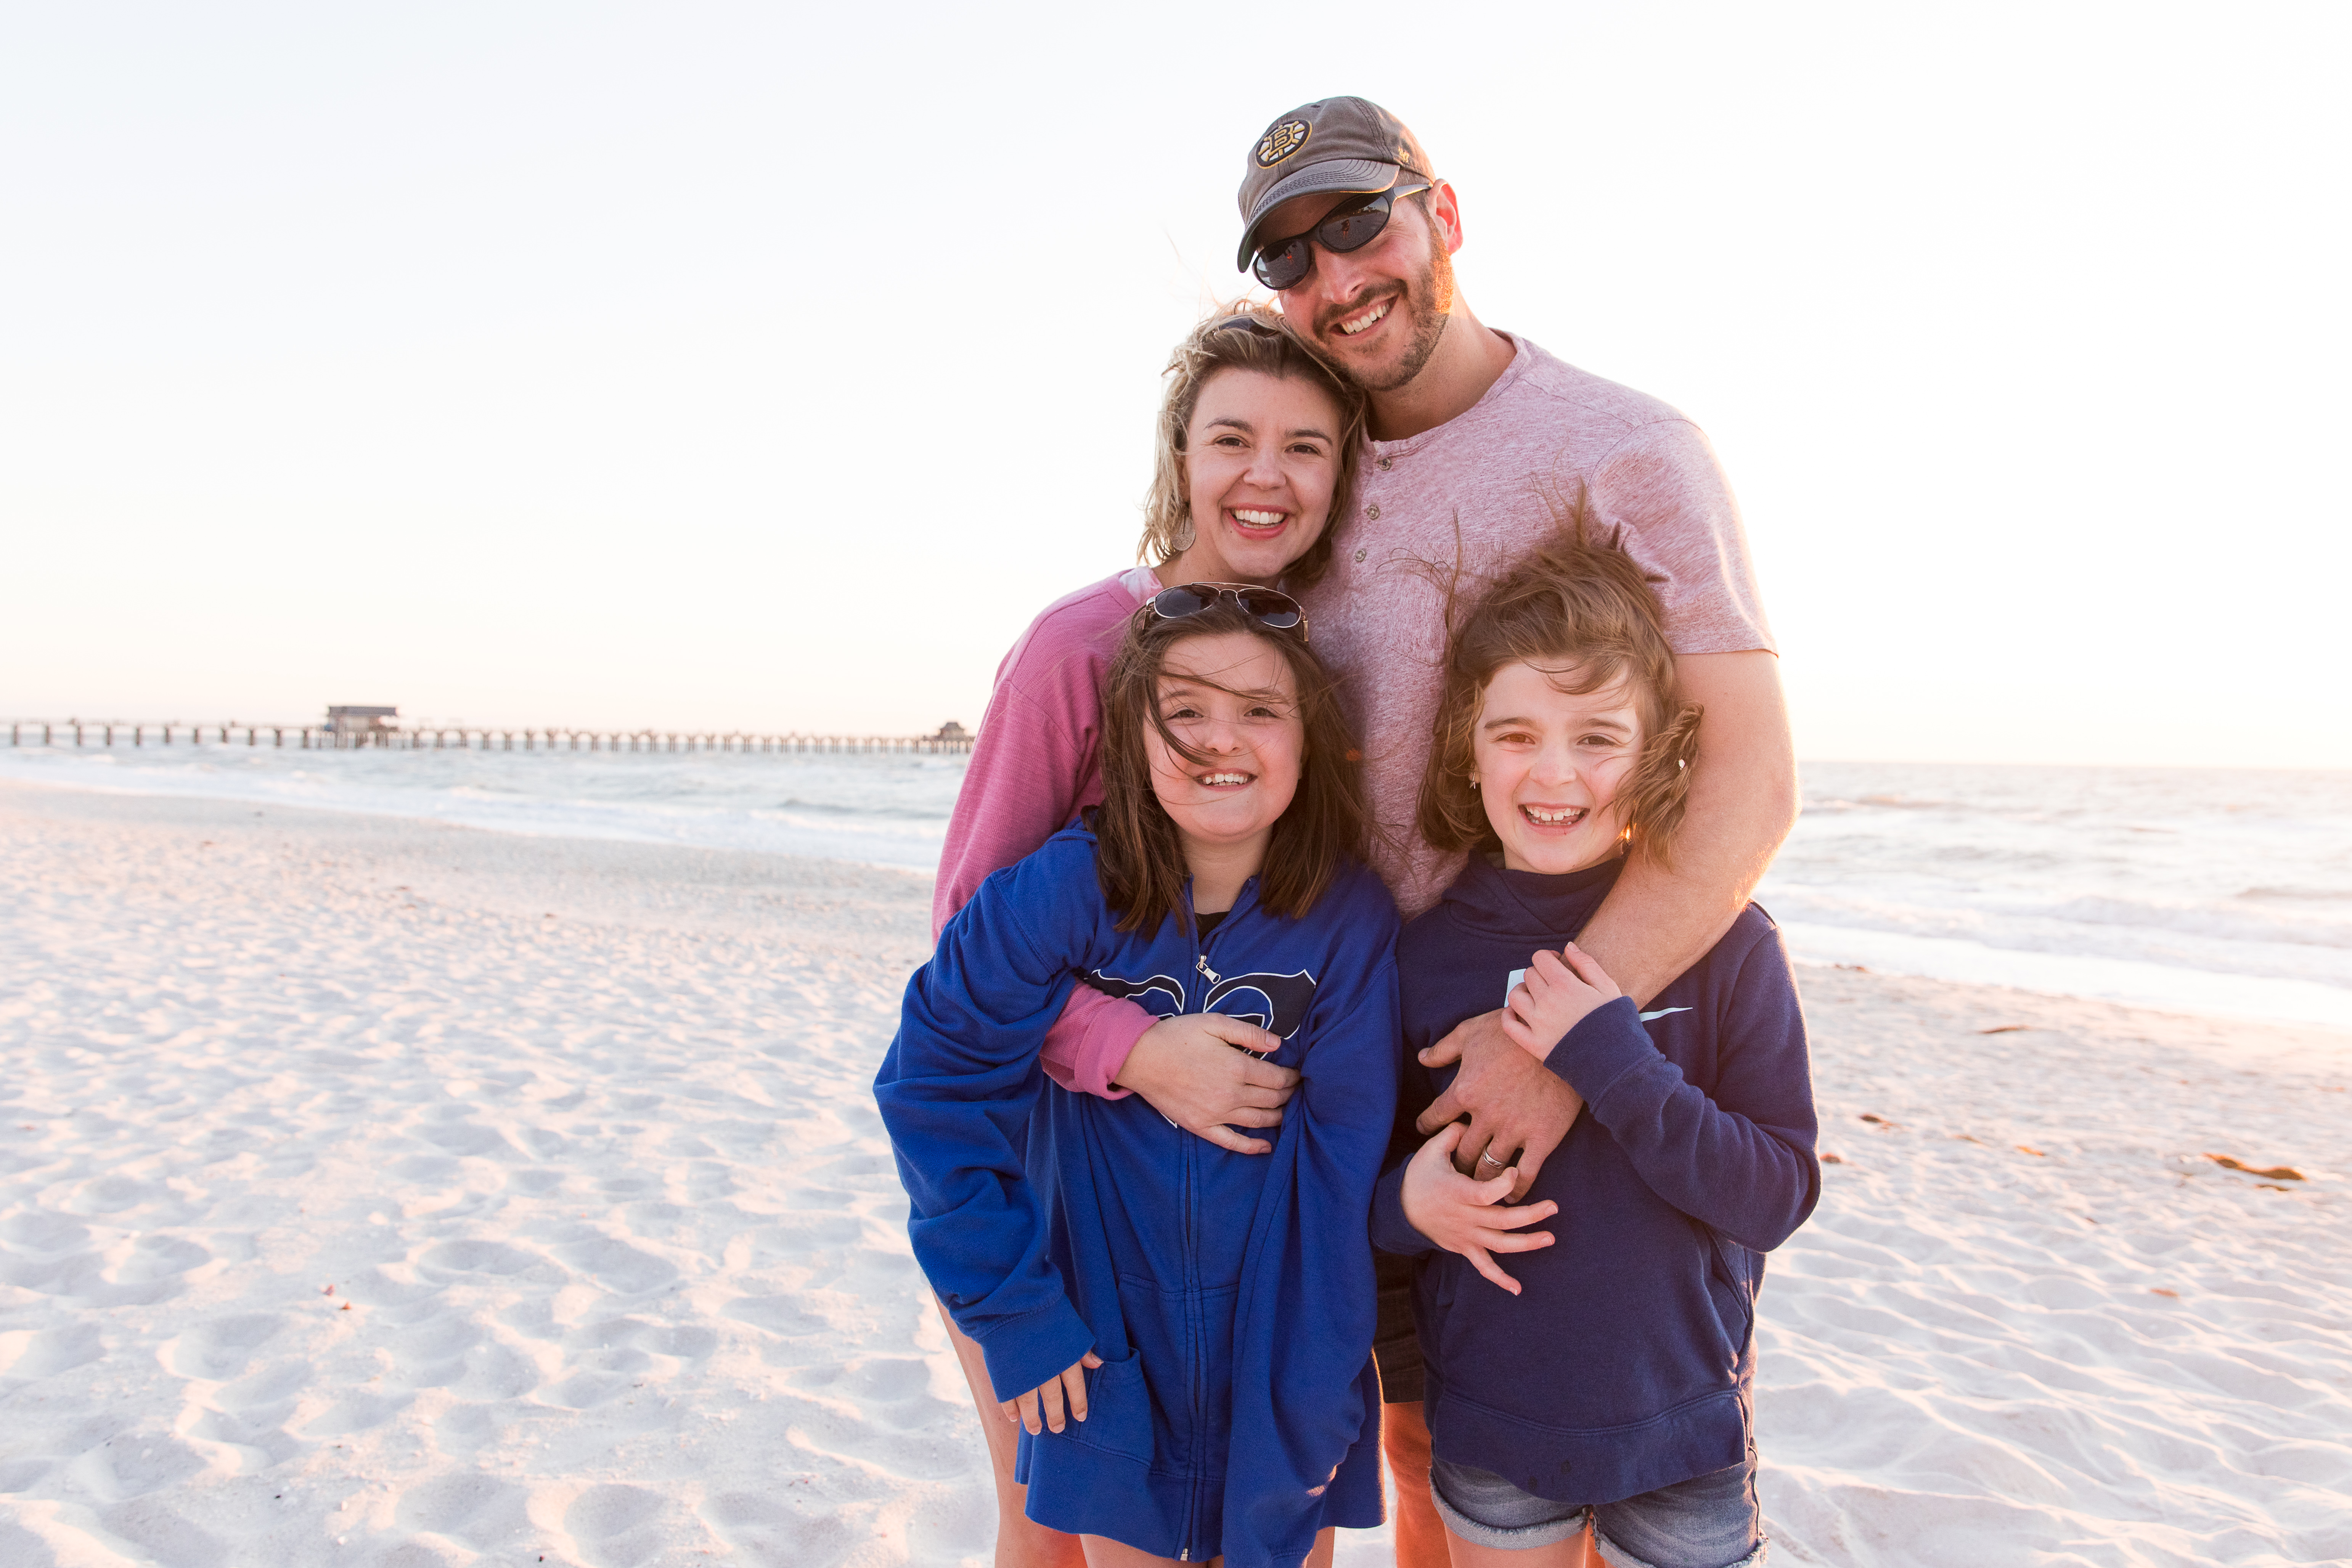 kristy dooley and family on beach